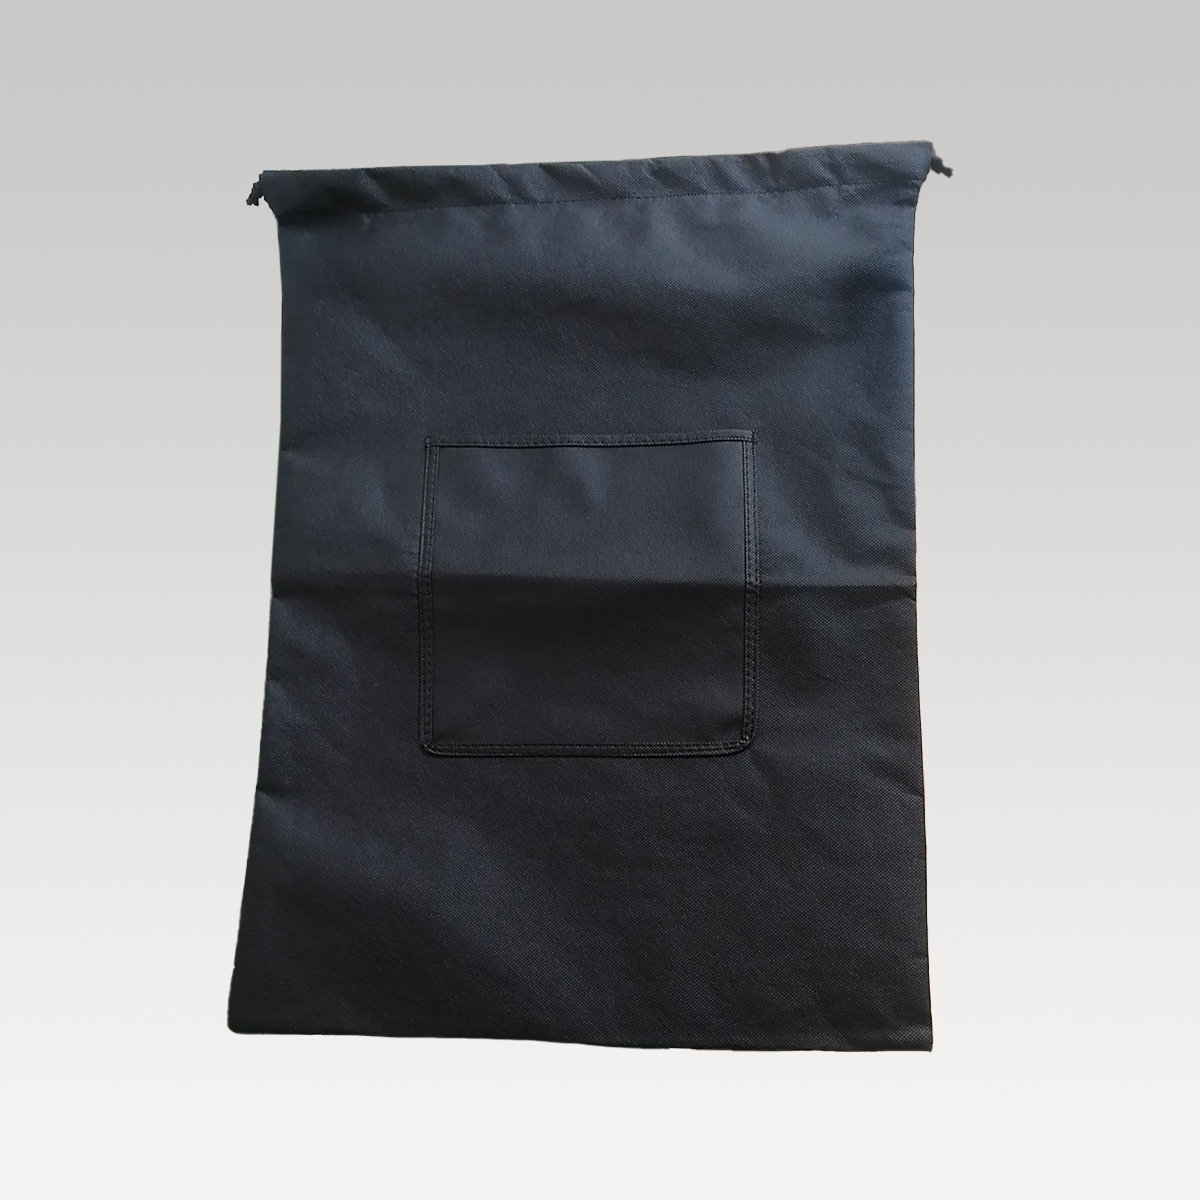 Image of Laundry Bag Non Woven Black